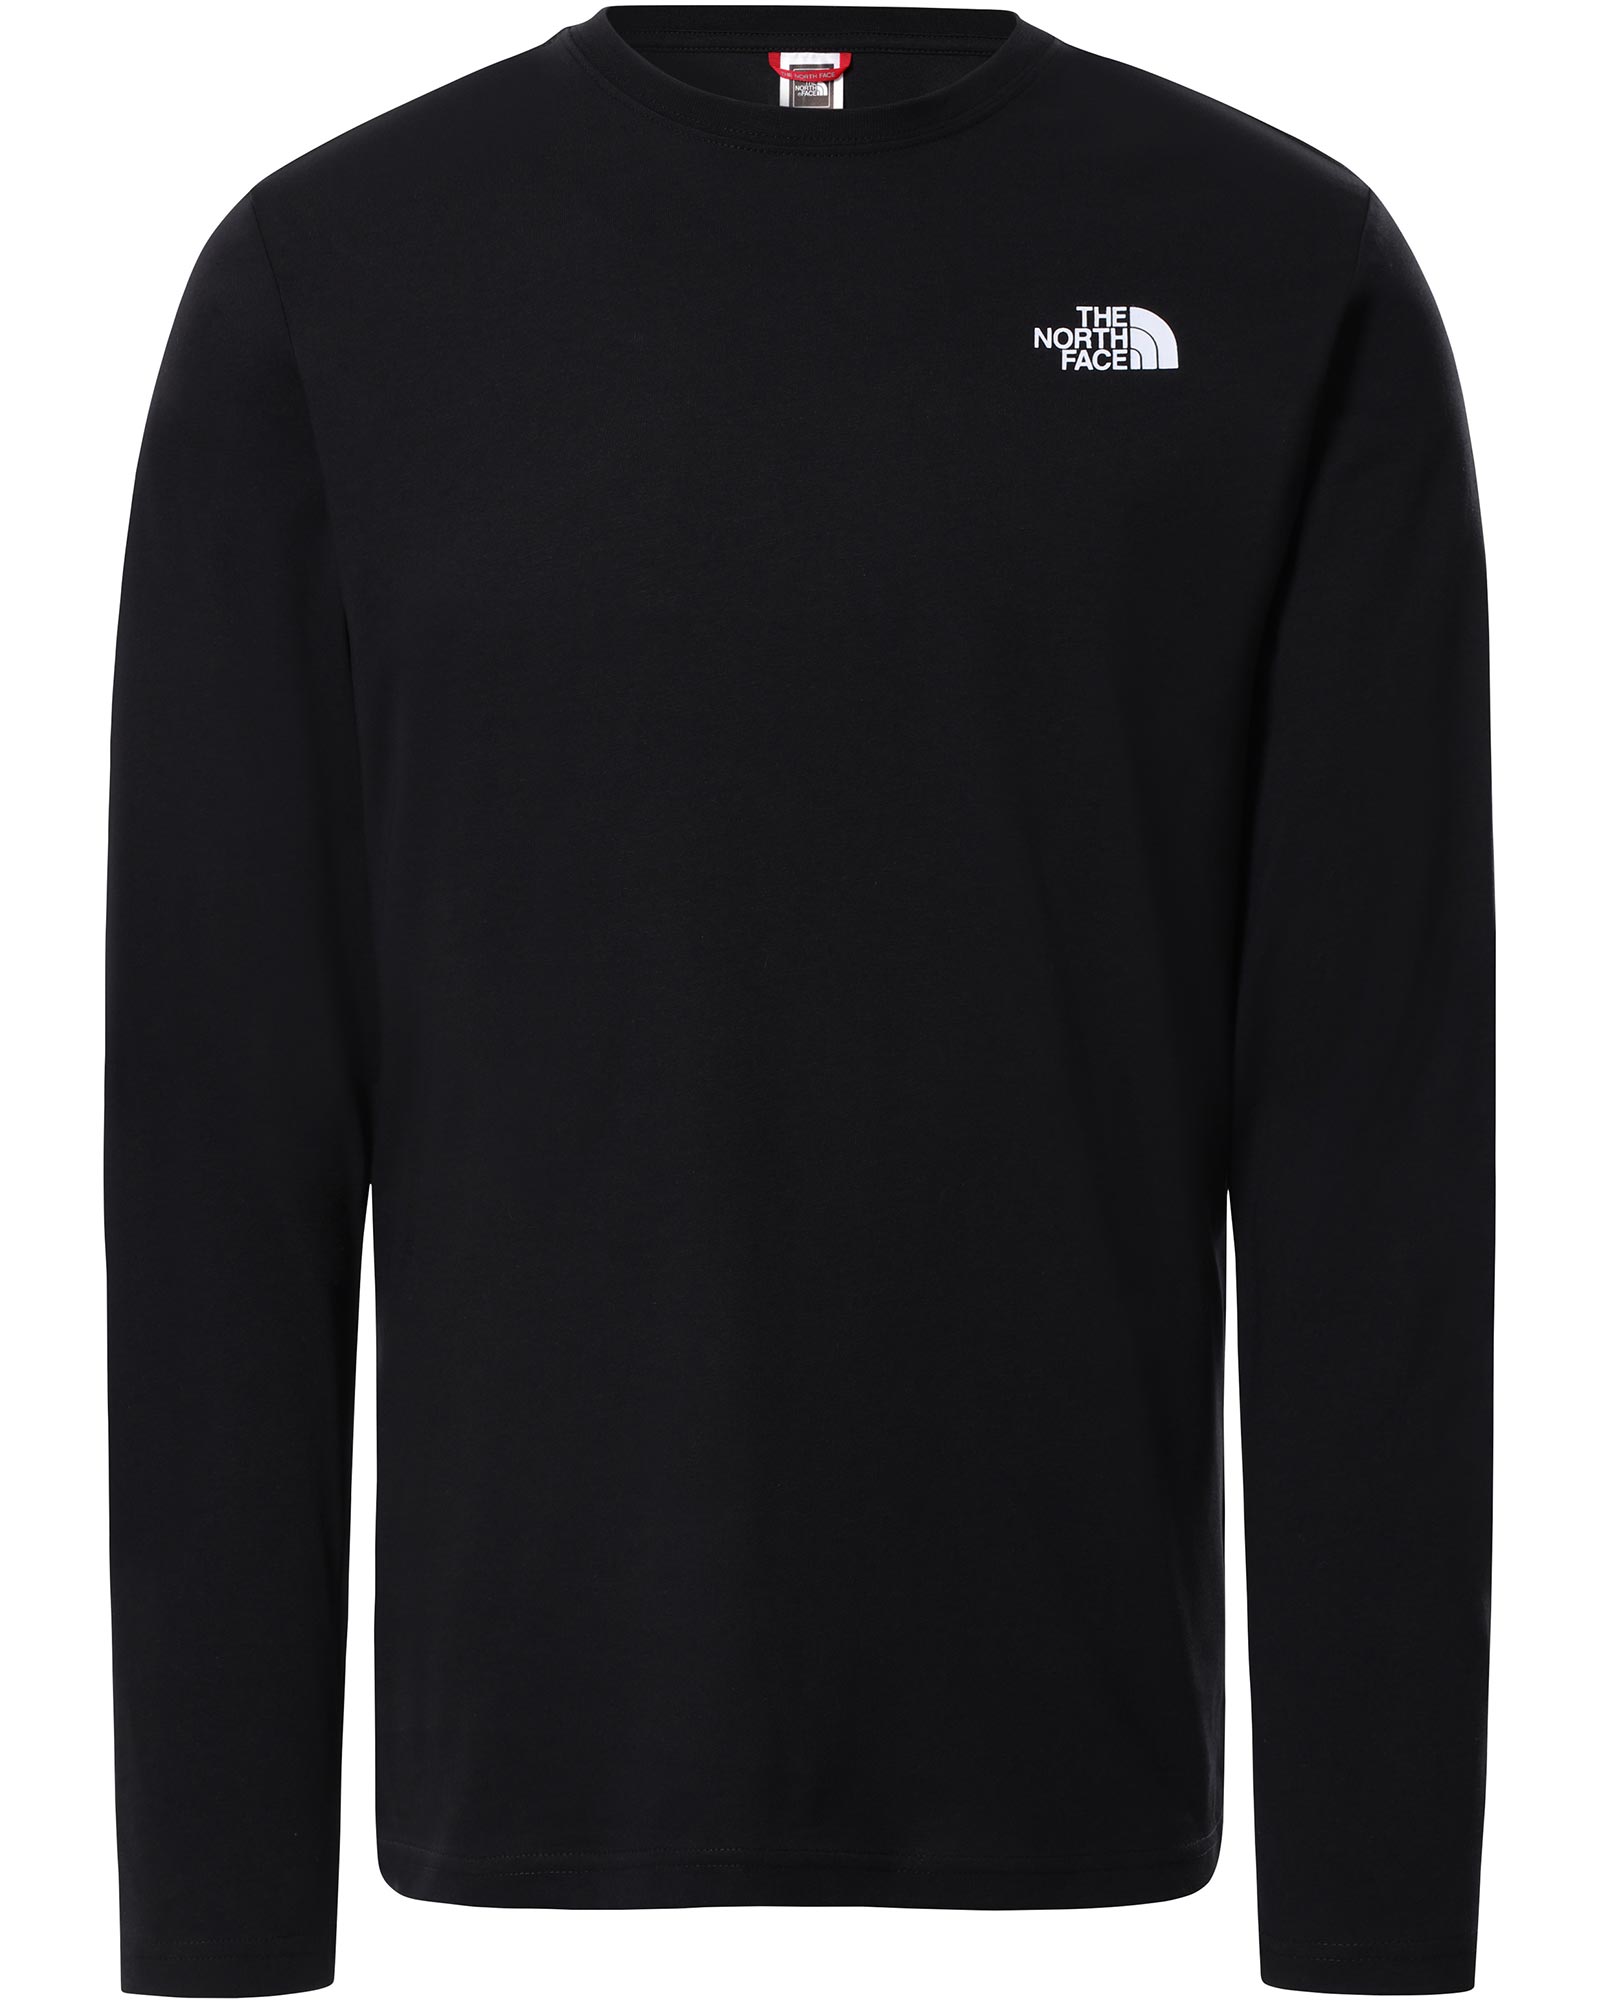 The North Face Red Box Men’s Long Sleeve T Shirt - TNF Black/Thyme Camo XS